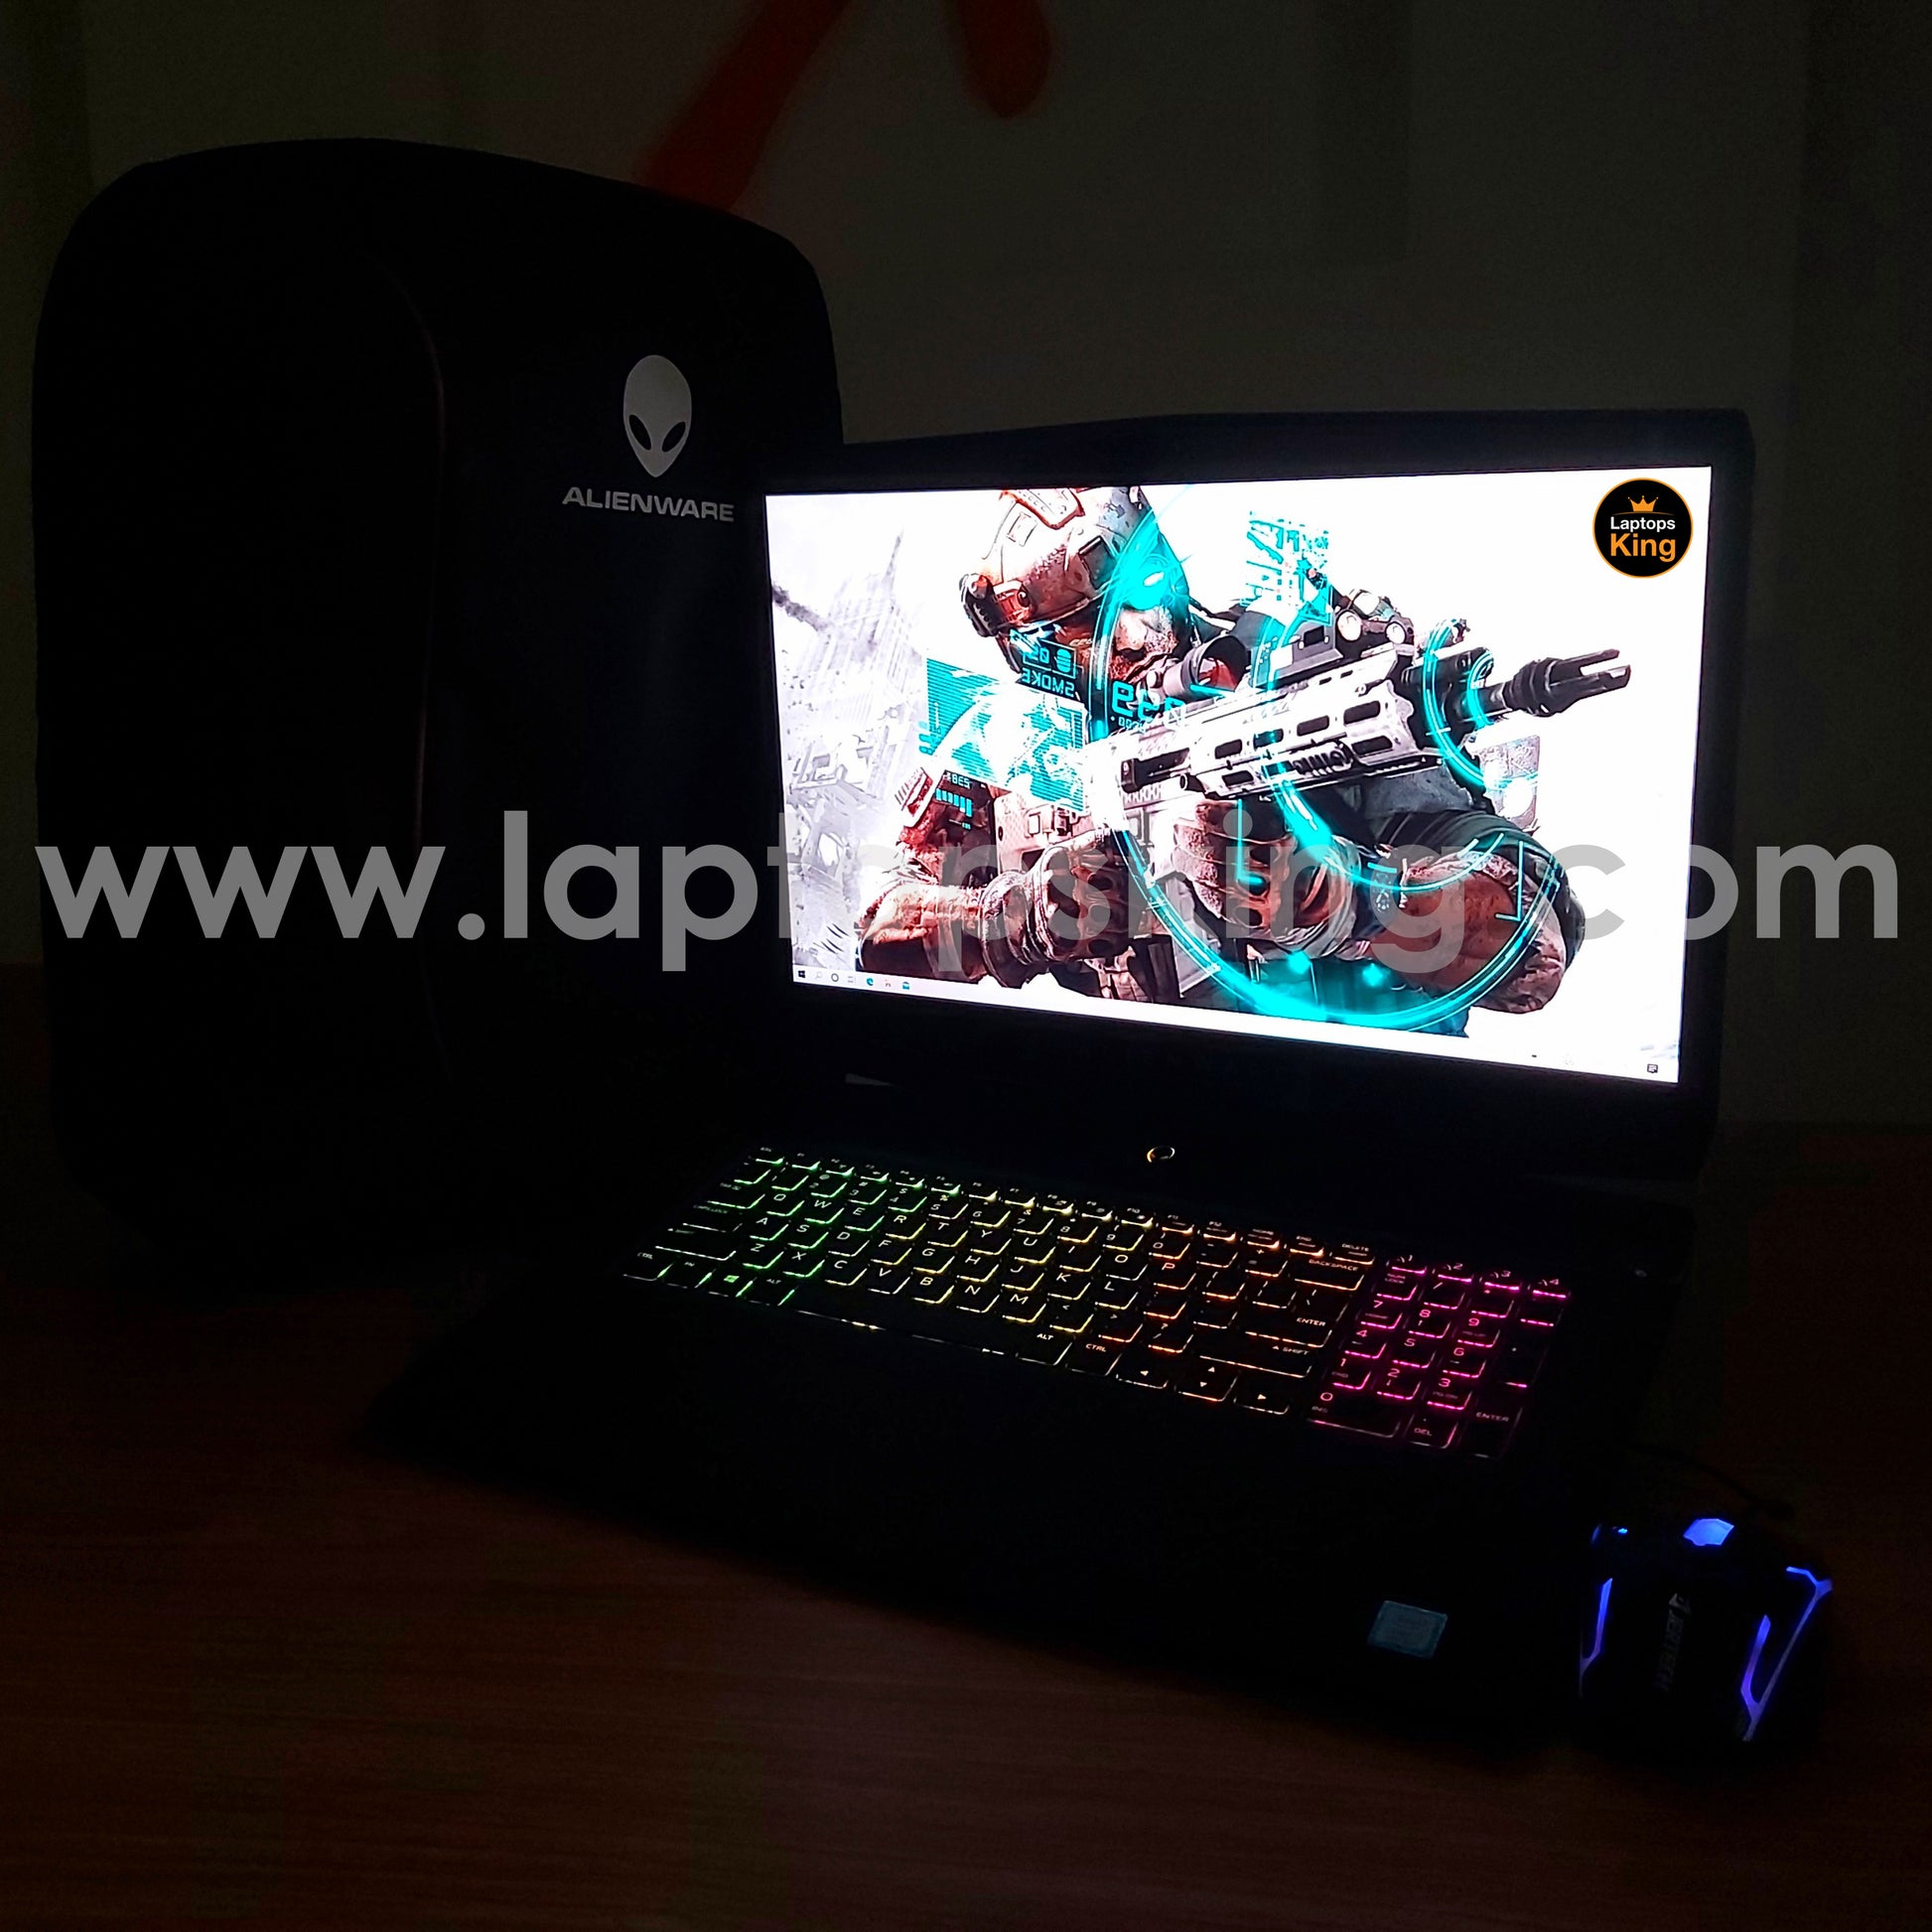 Alienware M17 Rtx 2080 i7-8750h Gaming Laptop (New Open Box) Gaming laptop, Graphic Design laptop, best laptop for gaming, Best laptop for graphic design, computer for sale Lebanon, laptop for video editing in Lebanon, laptop for sale Lebanon, Best graphic design laptop,	Best video editing laptop, Best programming laptop, laptop for sale in Lebanon, laptops for sale in Lebanon, laptop for sale in Lebanon, buy computer Lebanon, buy laptop Lebanon.